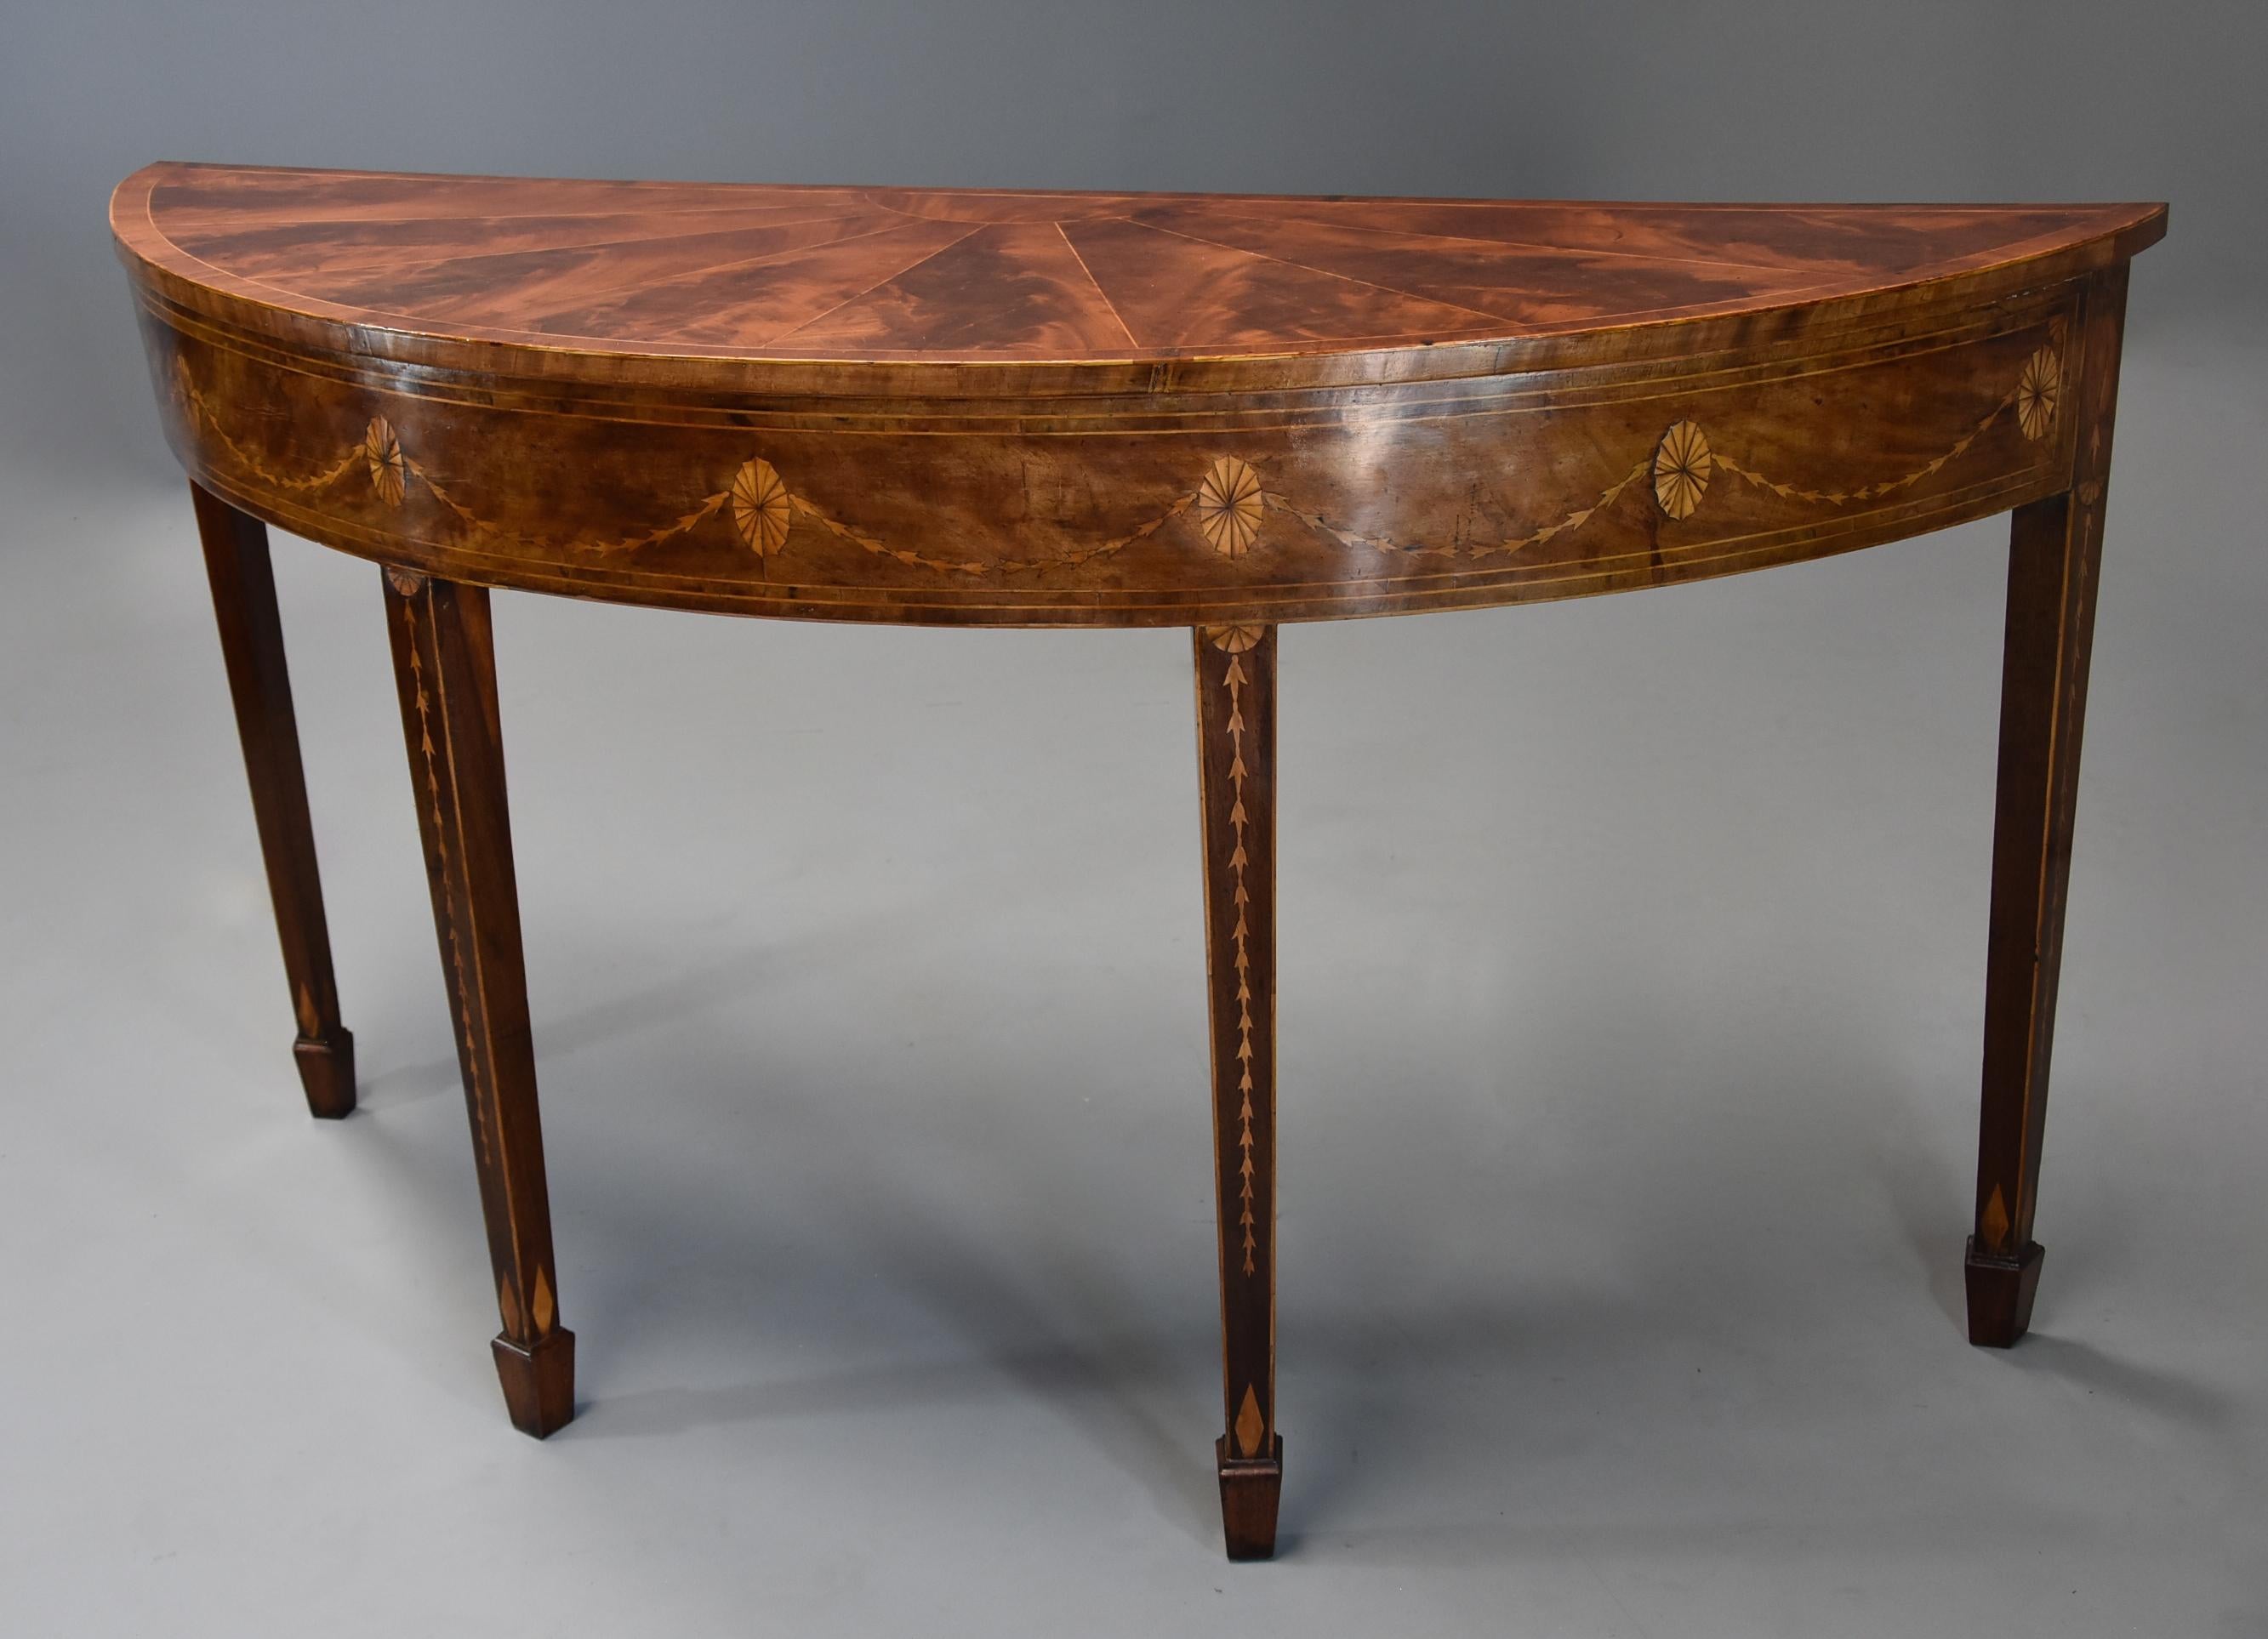 A rare late 18th century (circa 1780) mahogany side table of semi-elliptical form with superb, rich patina (color) of wonderful proportions, possibly Irish.

This table consists of a semi-elliptical top with a design of segmented curl mahogany